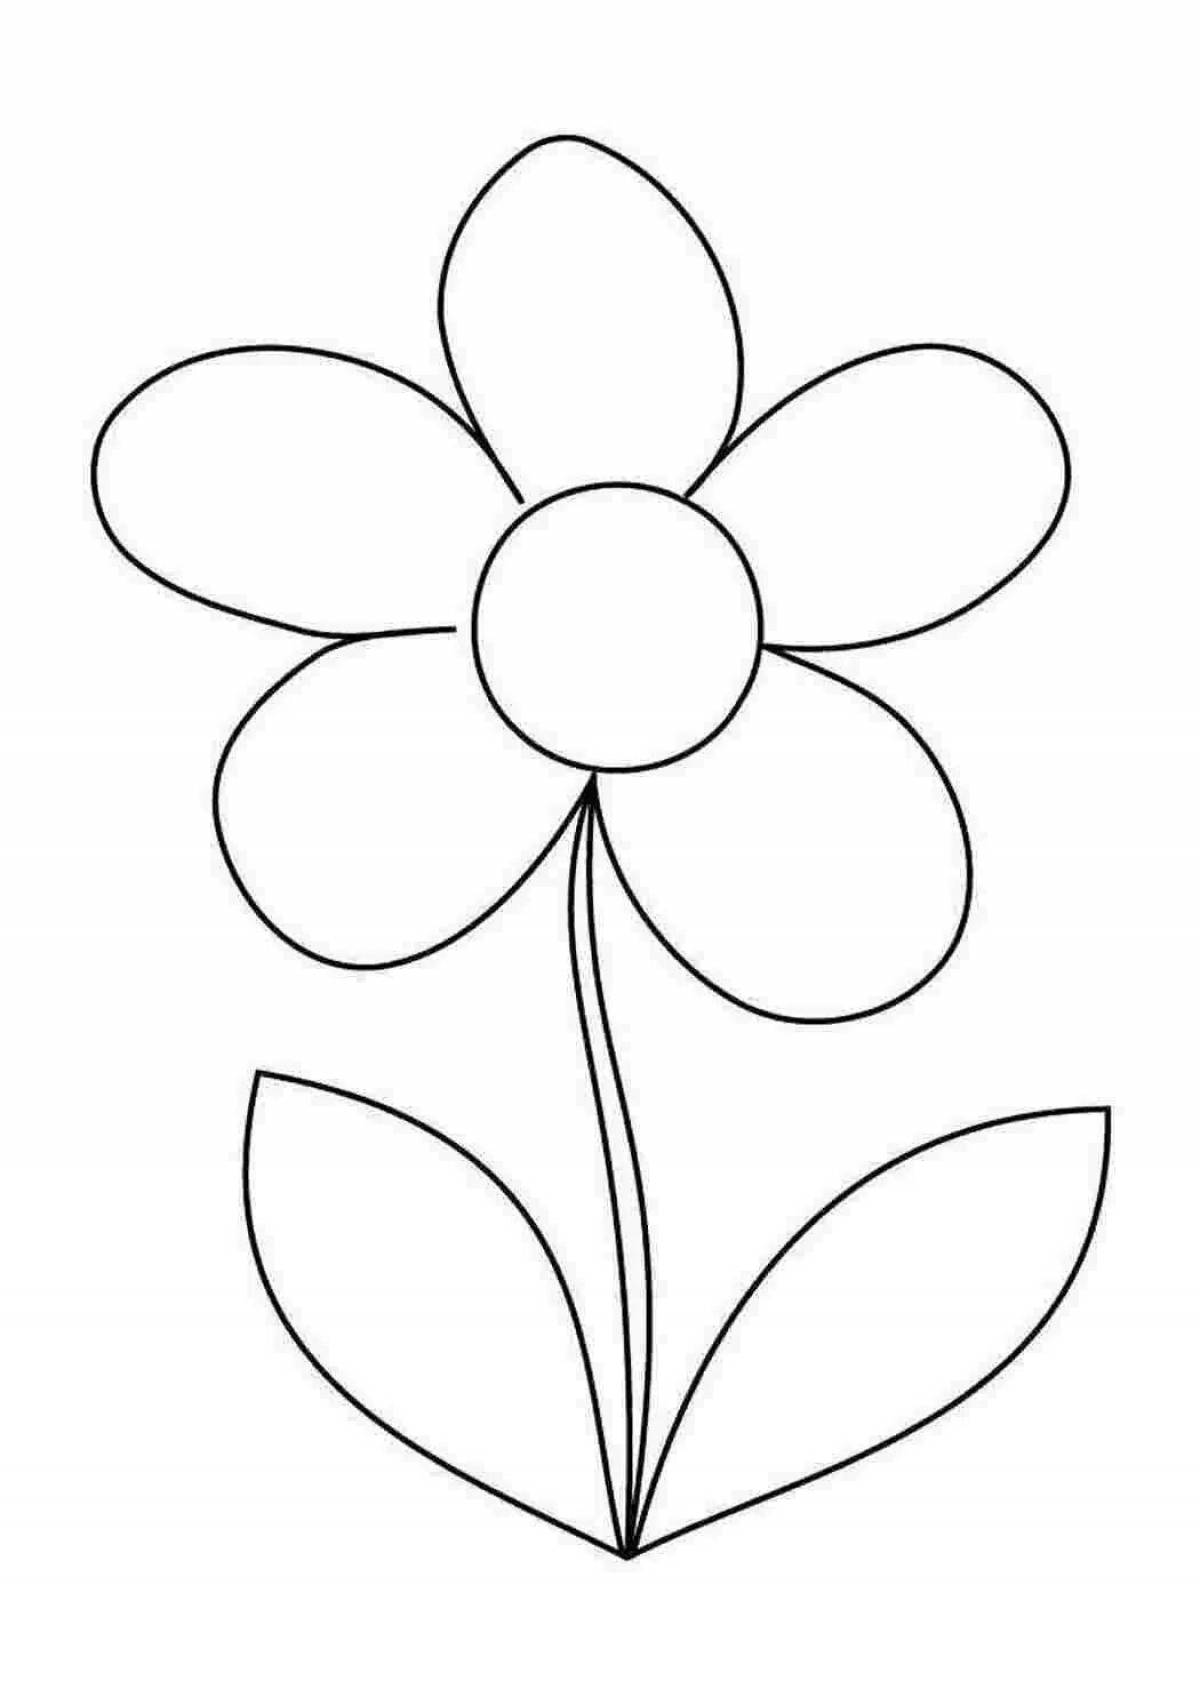 Tempting daisy coloring for kids